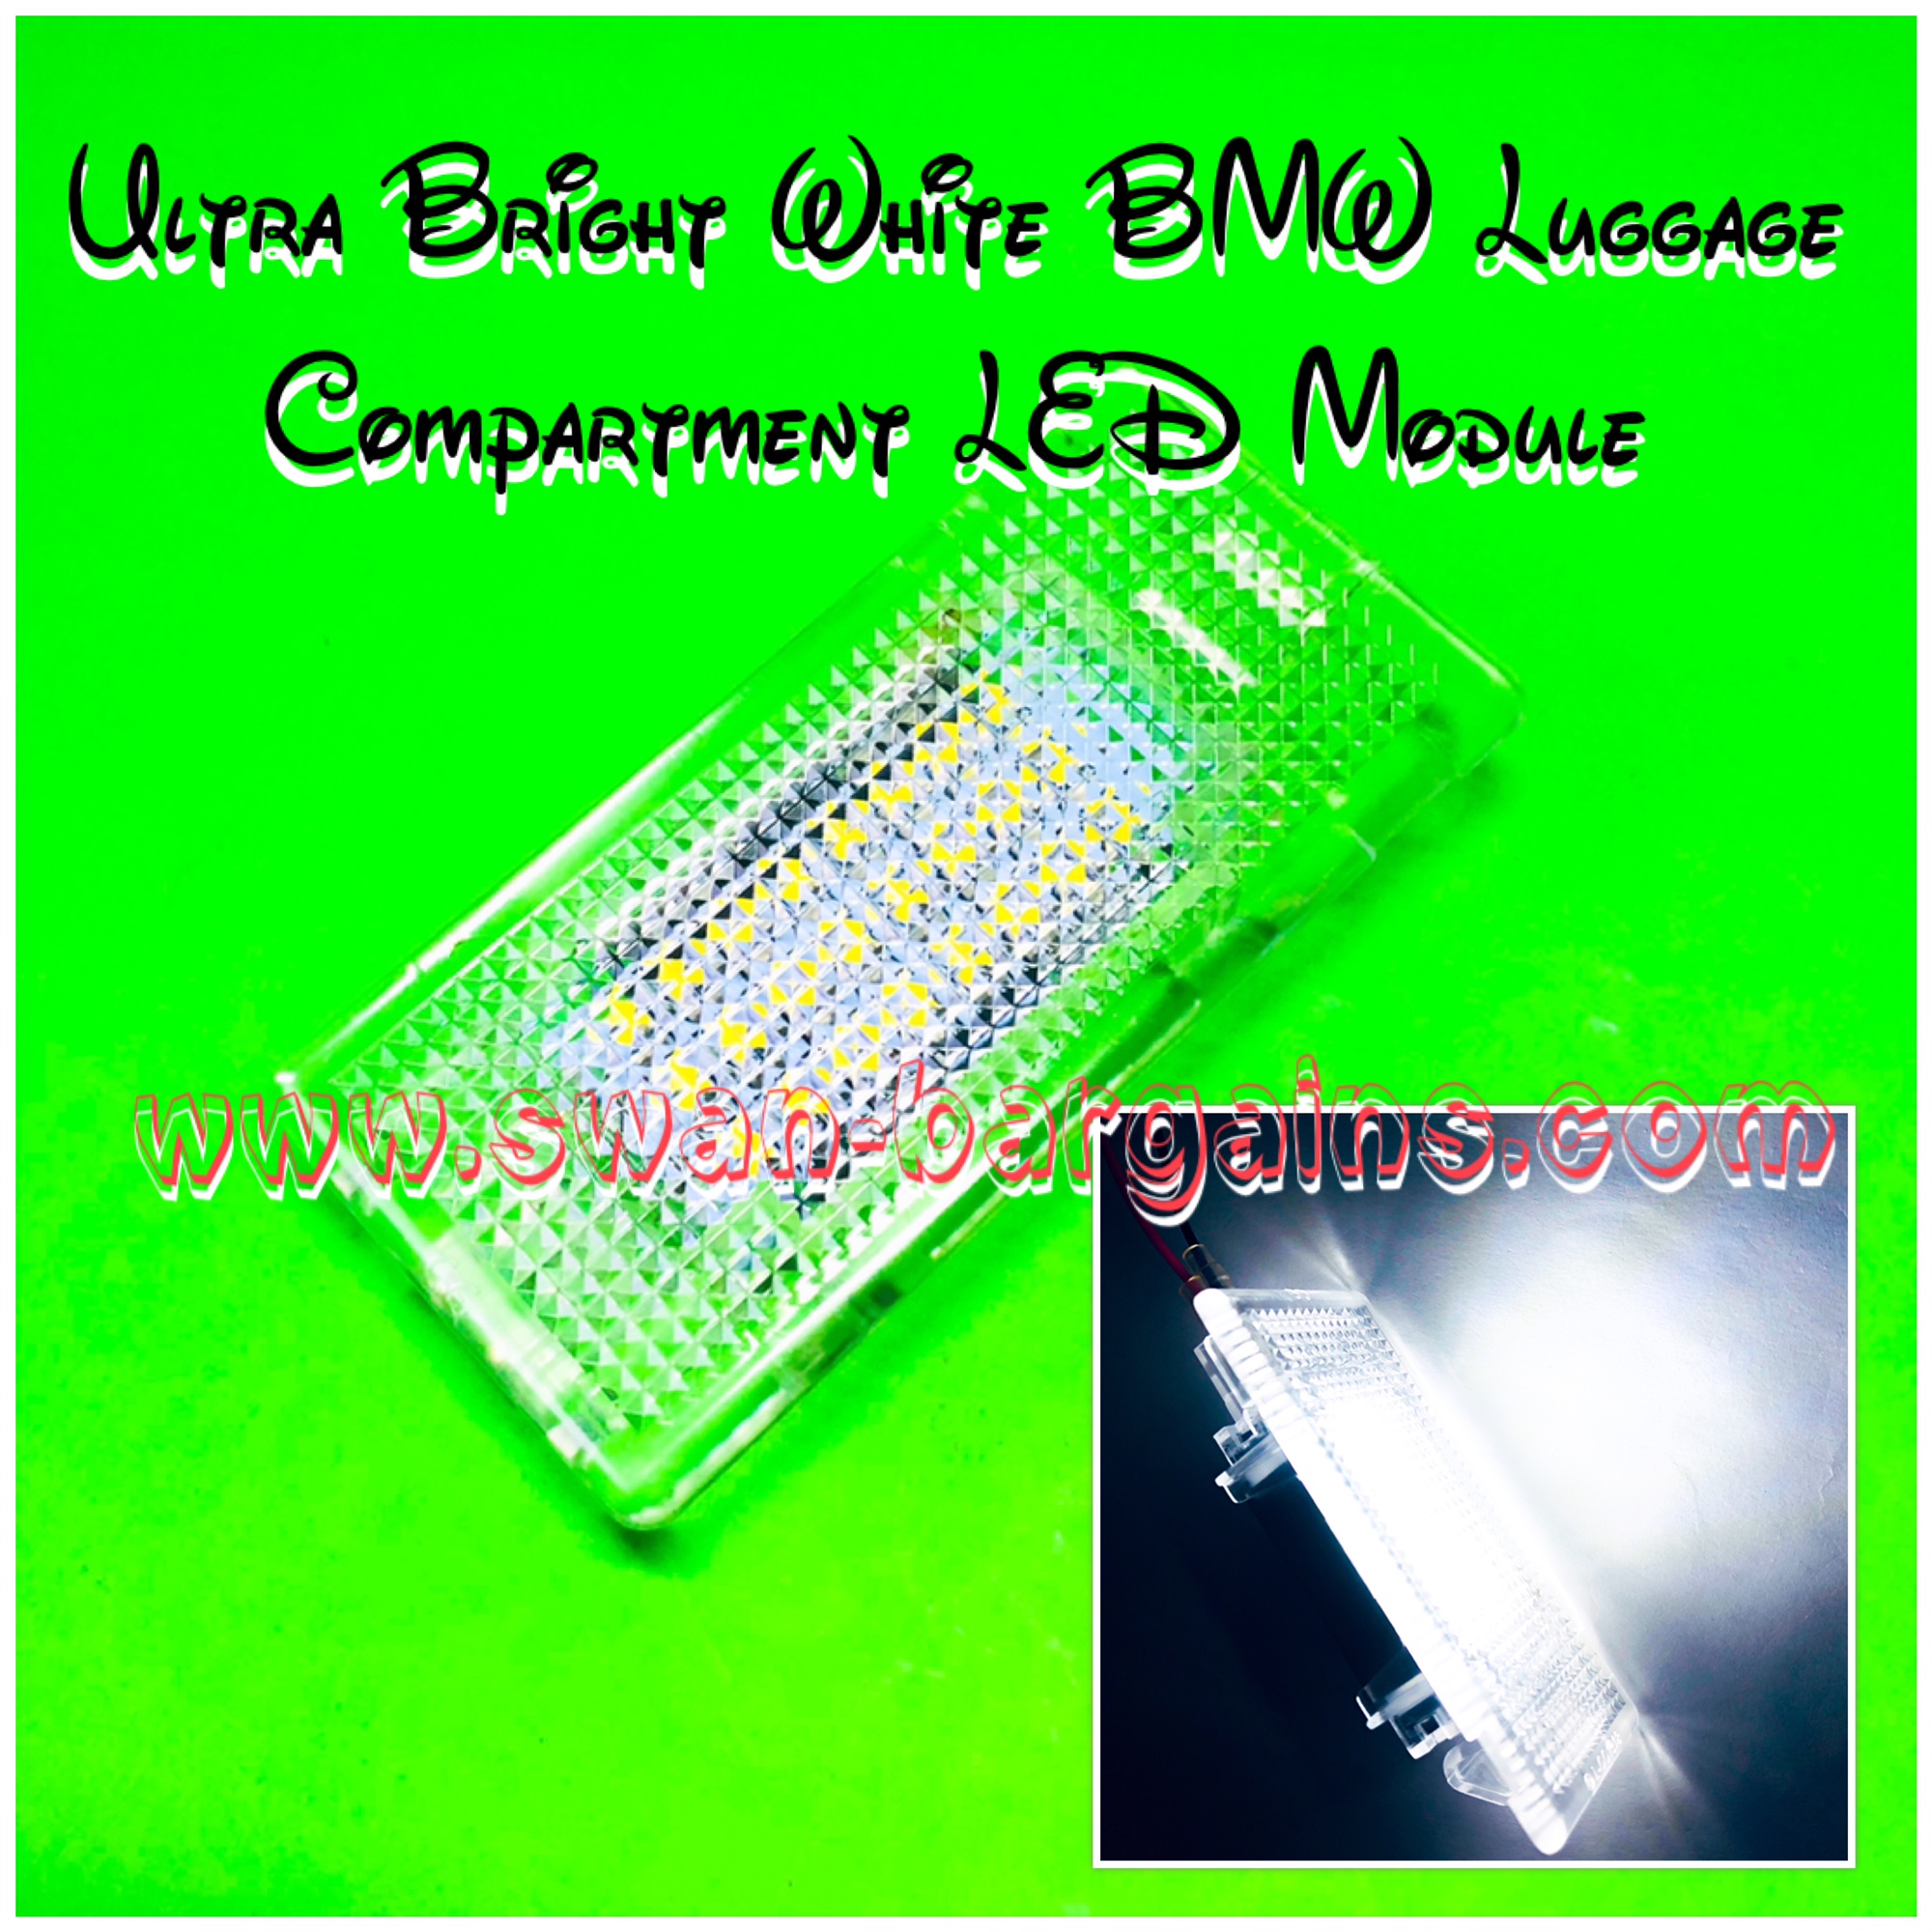 BMW Ultra-Bright Luggage Compartment LED Light Singapore